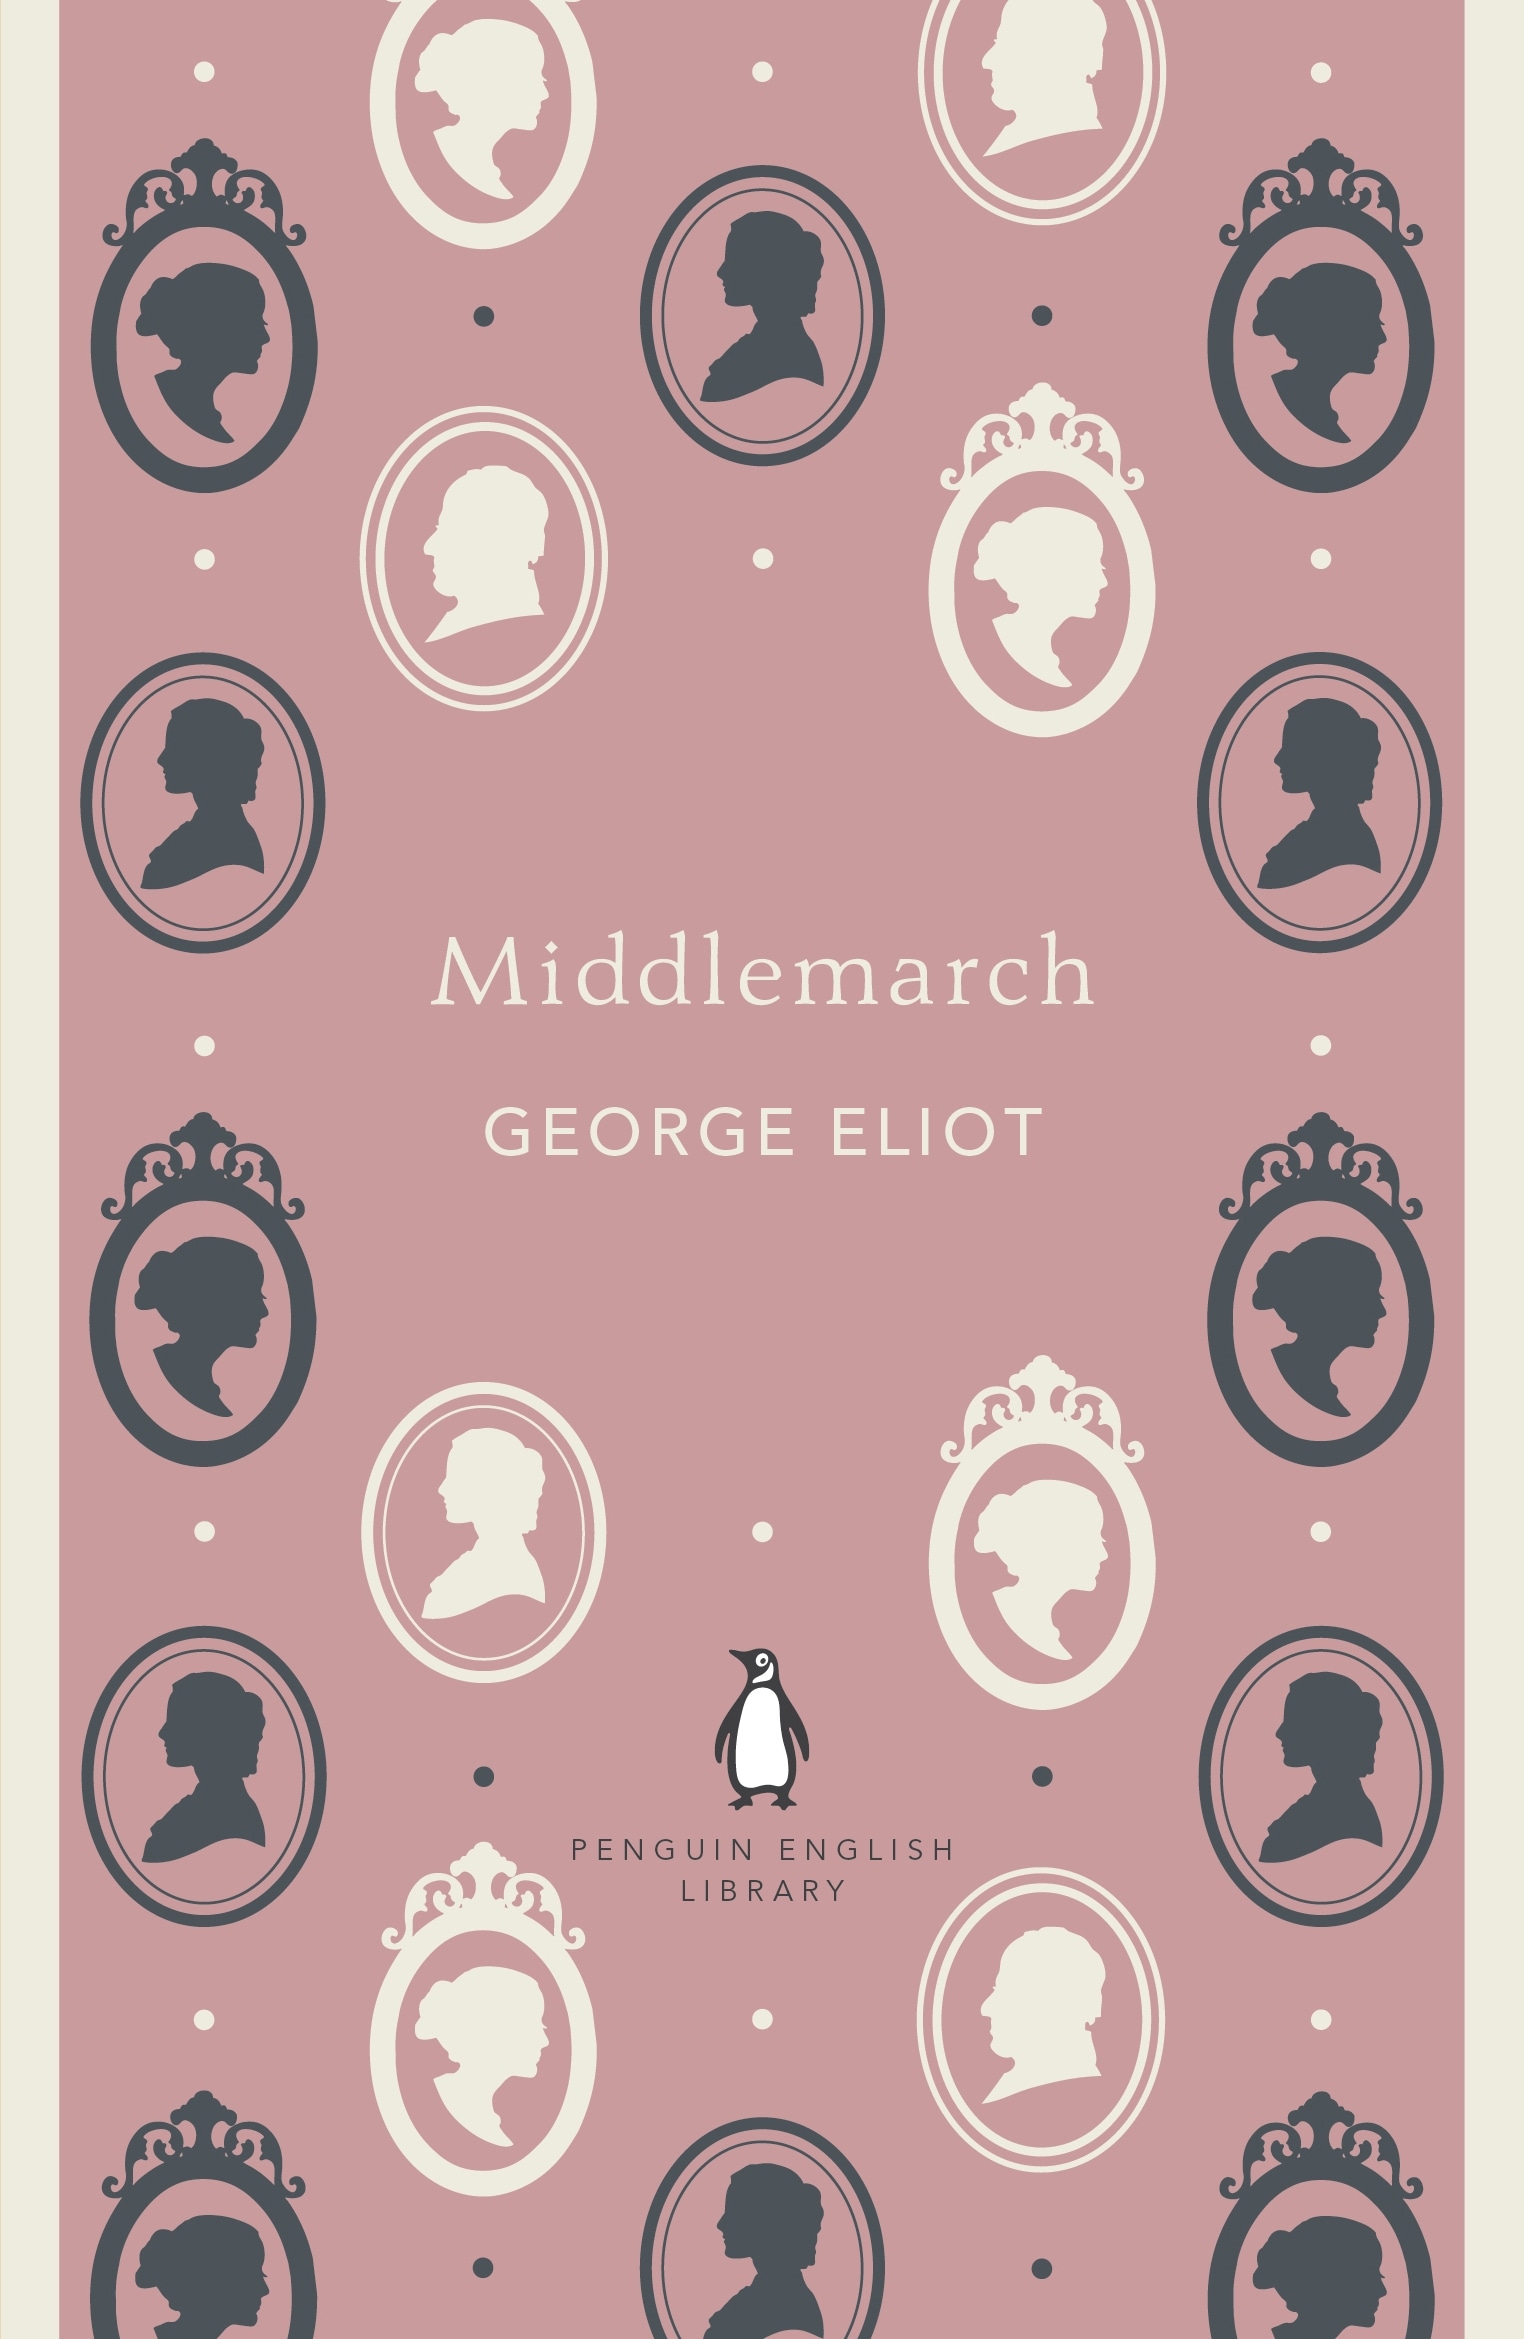 Book “Middlemarch” by George Eliot — September 27, 2012